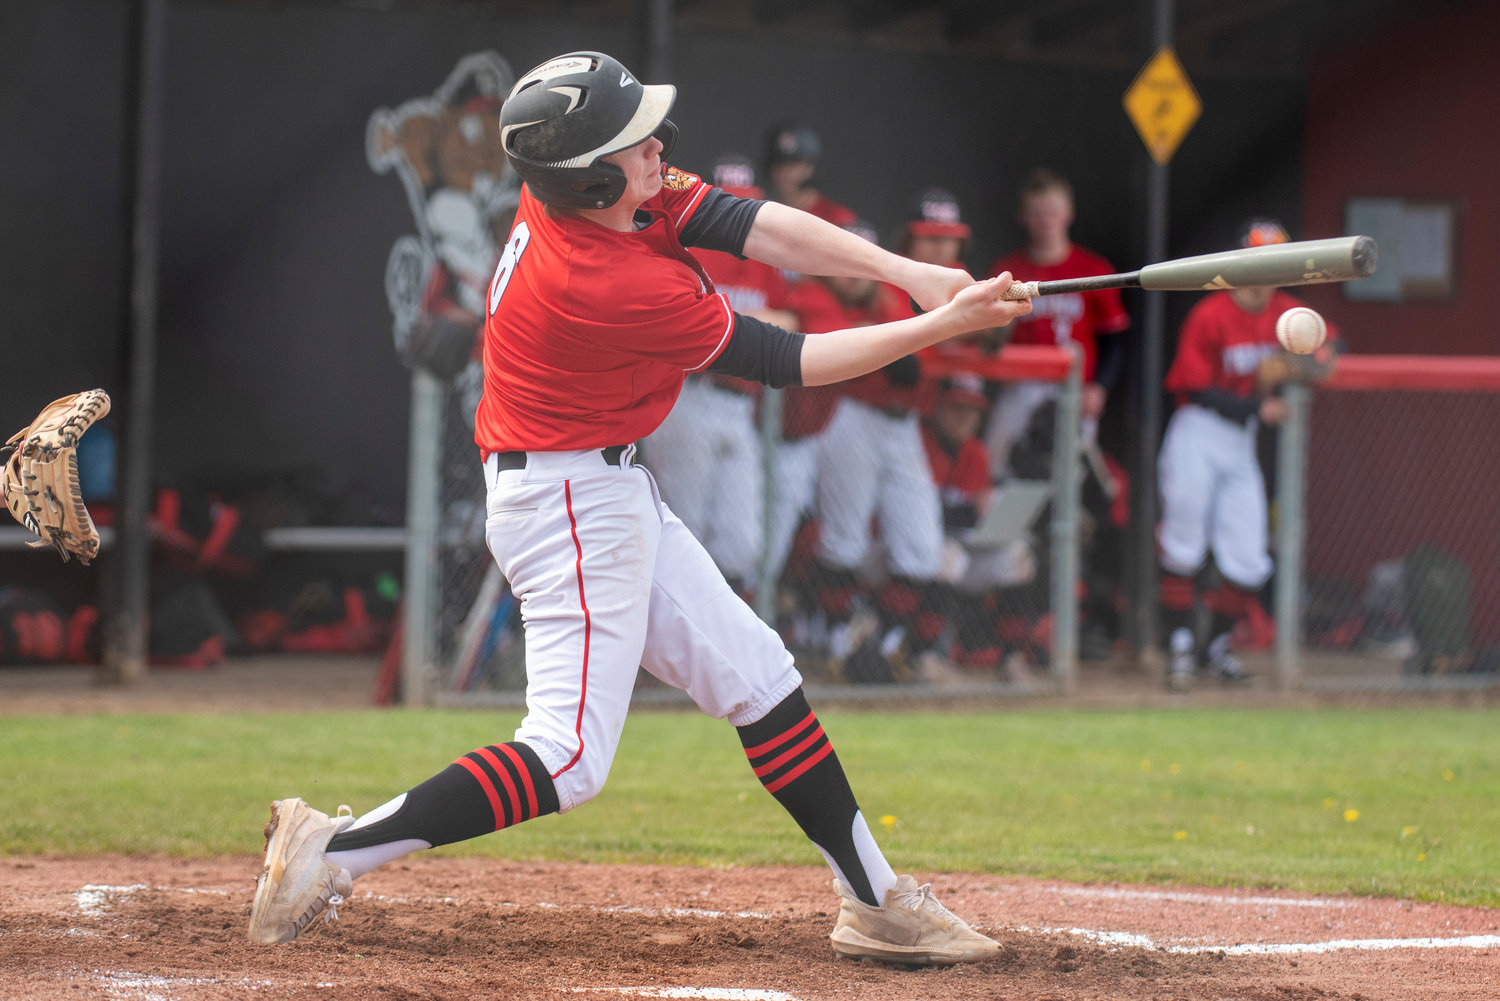 Tenino's Mikey Vassar lines up an Elma pitch during a home game on April 29.